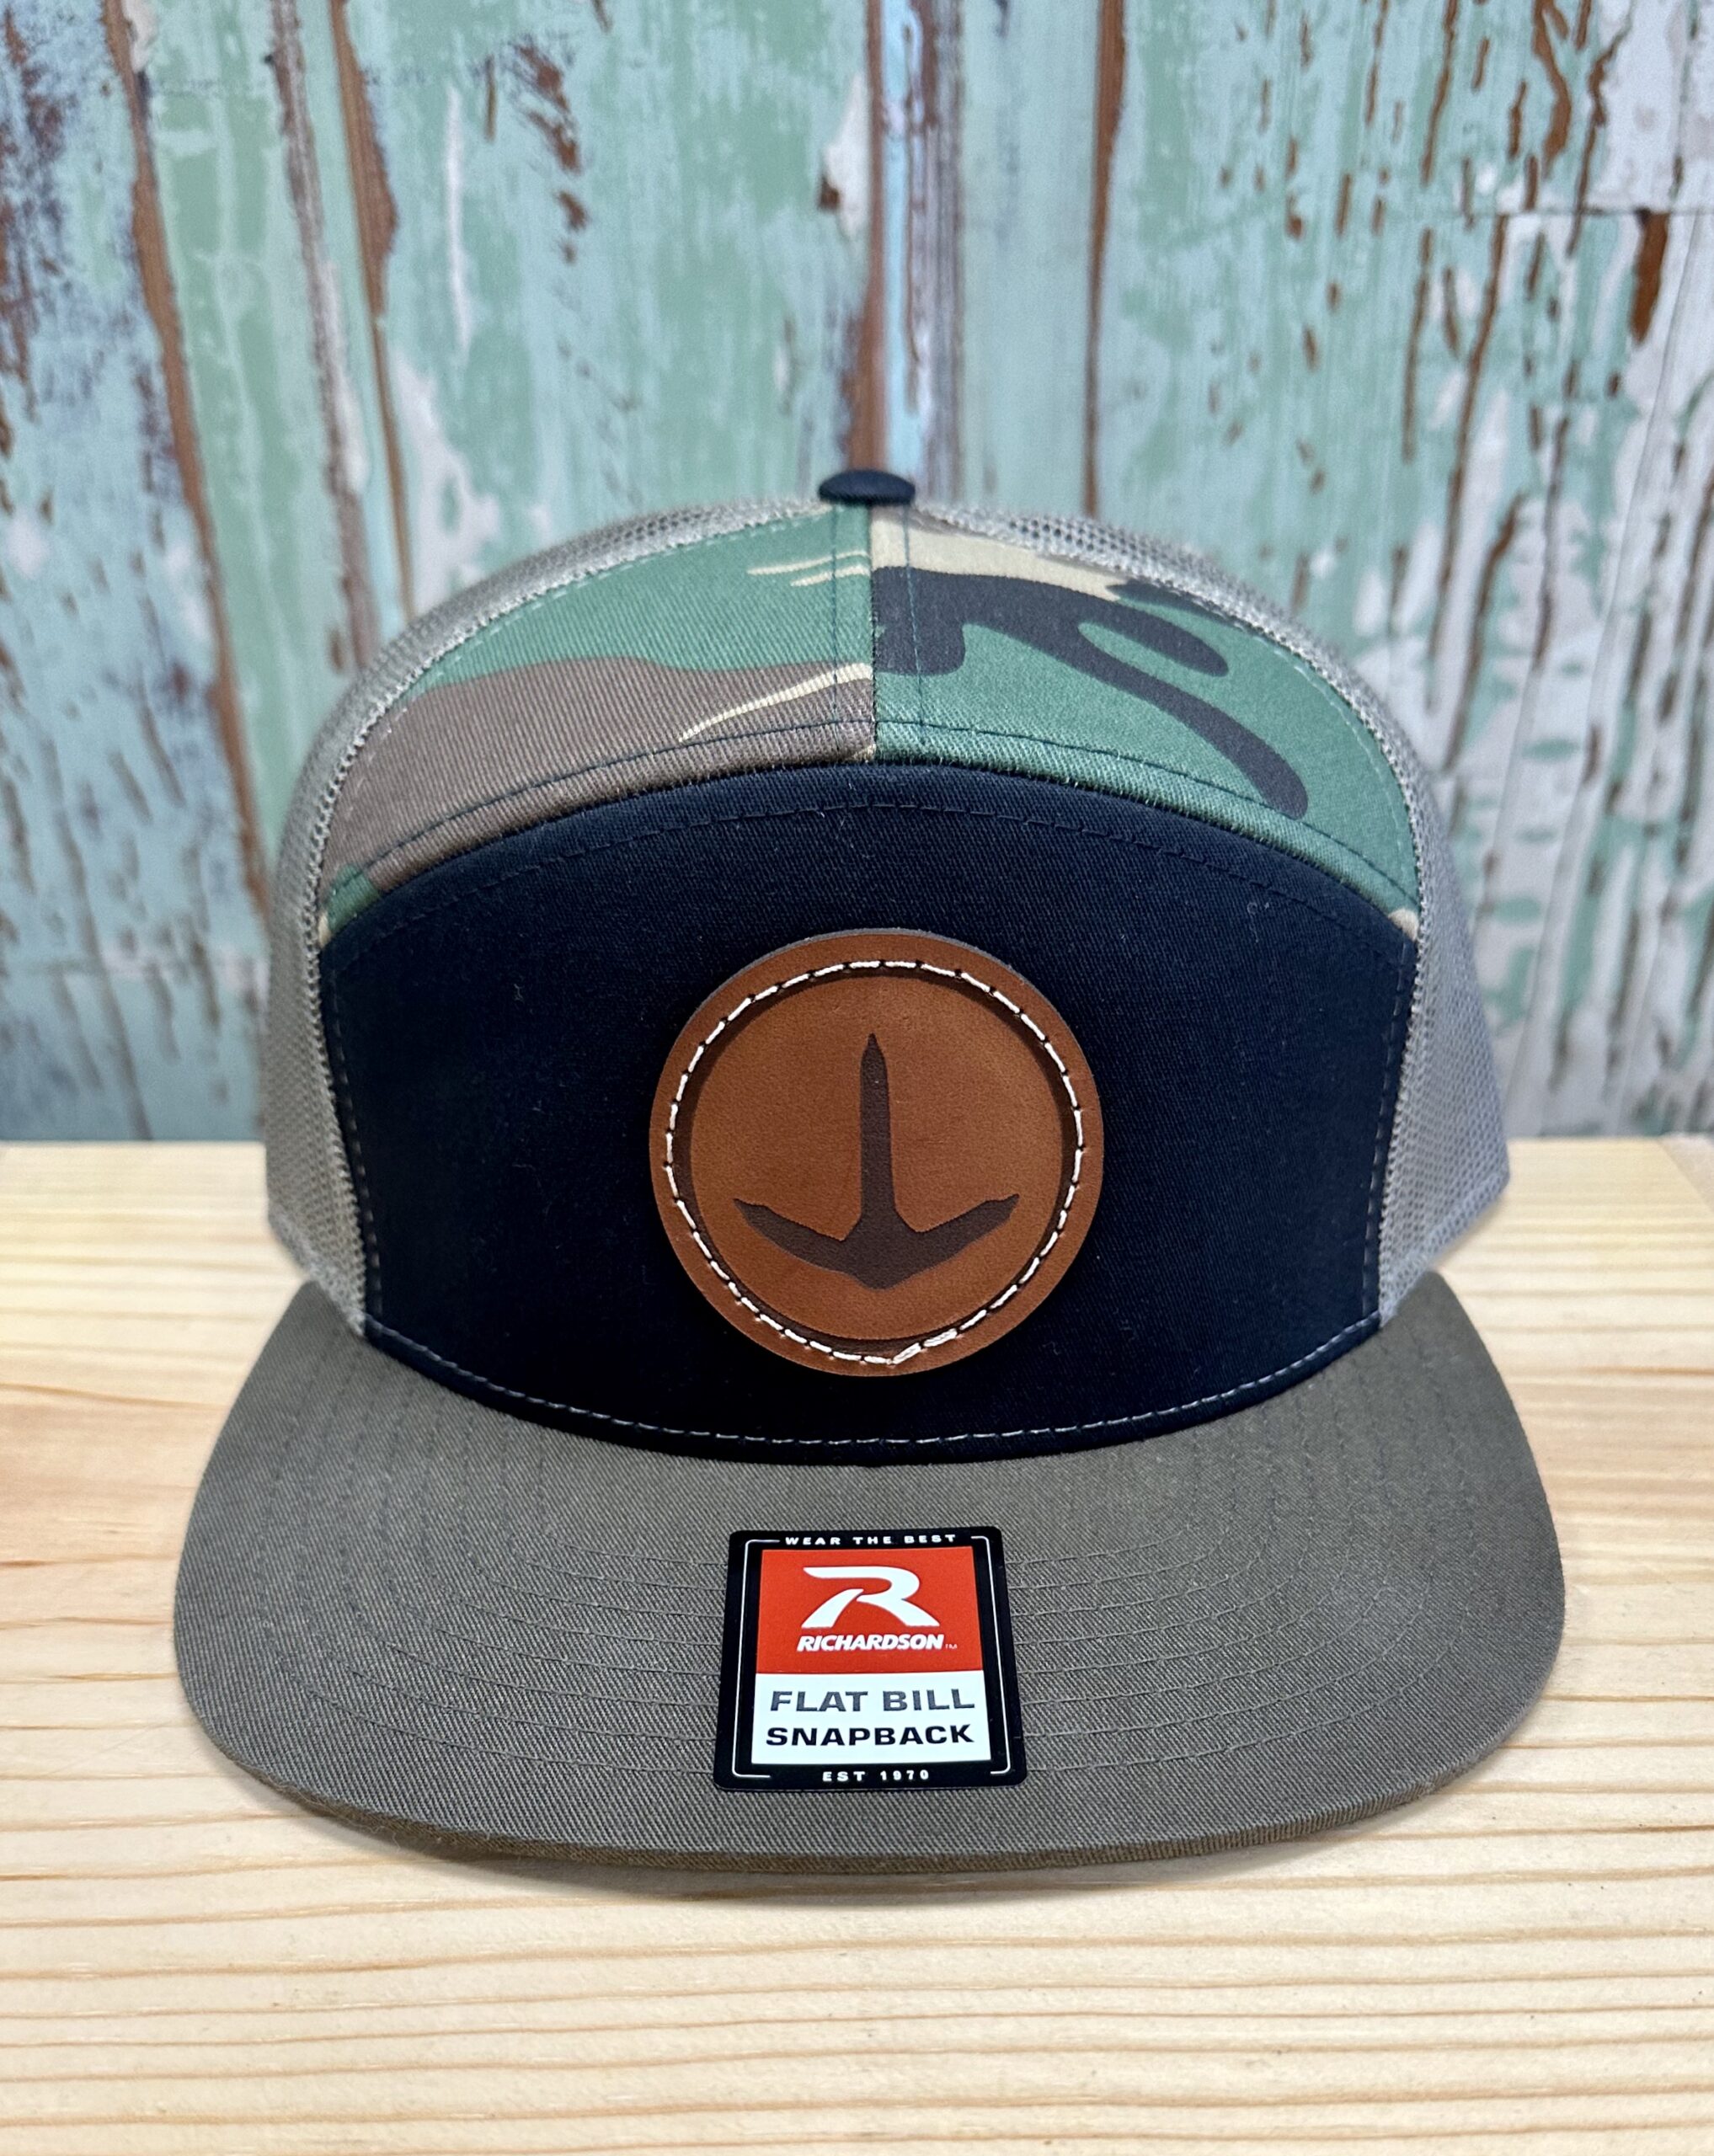 CREATE YOUR OWN LEATHER PATCH RICHARDSON 168 7 PANEL SNAPBACK HAT